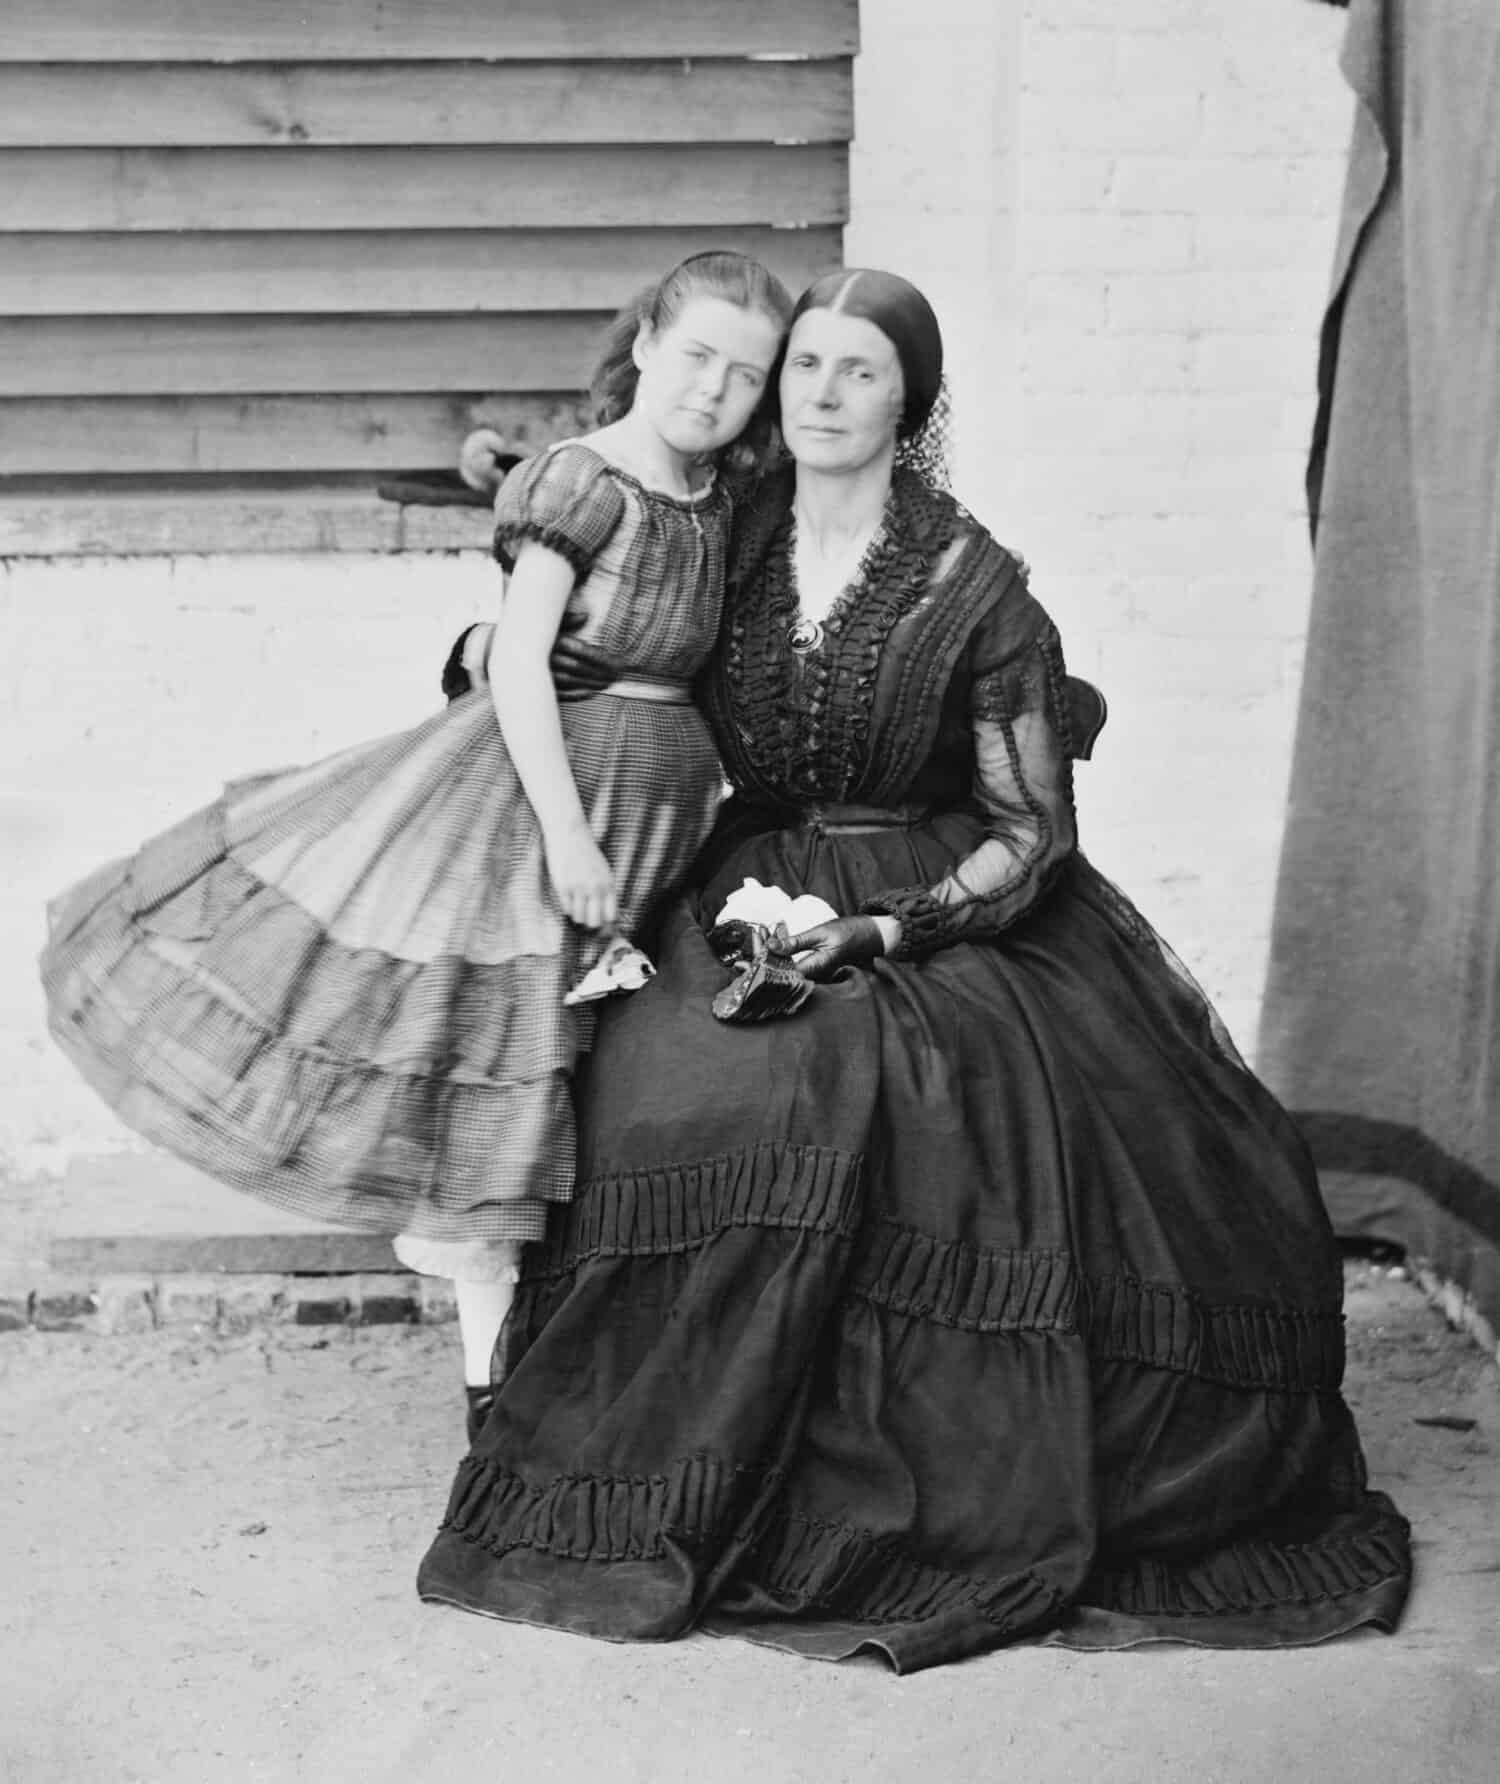 Mrs. Rose O'Neal Greenhow (1814-1864)(with her daughter), Confederate Spy during U.S. Civil War, imprisoned at old Capitol. She died on a mission to smuggle gold through the Union blockade in 1864.